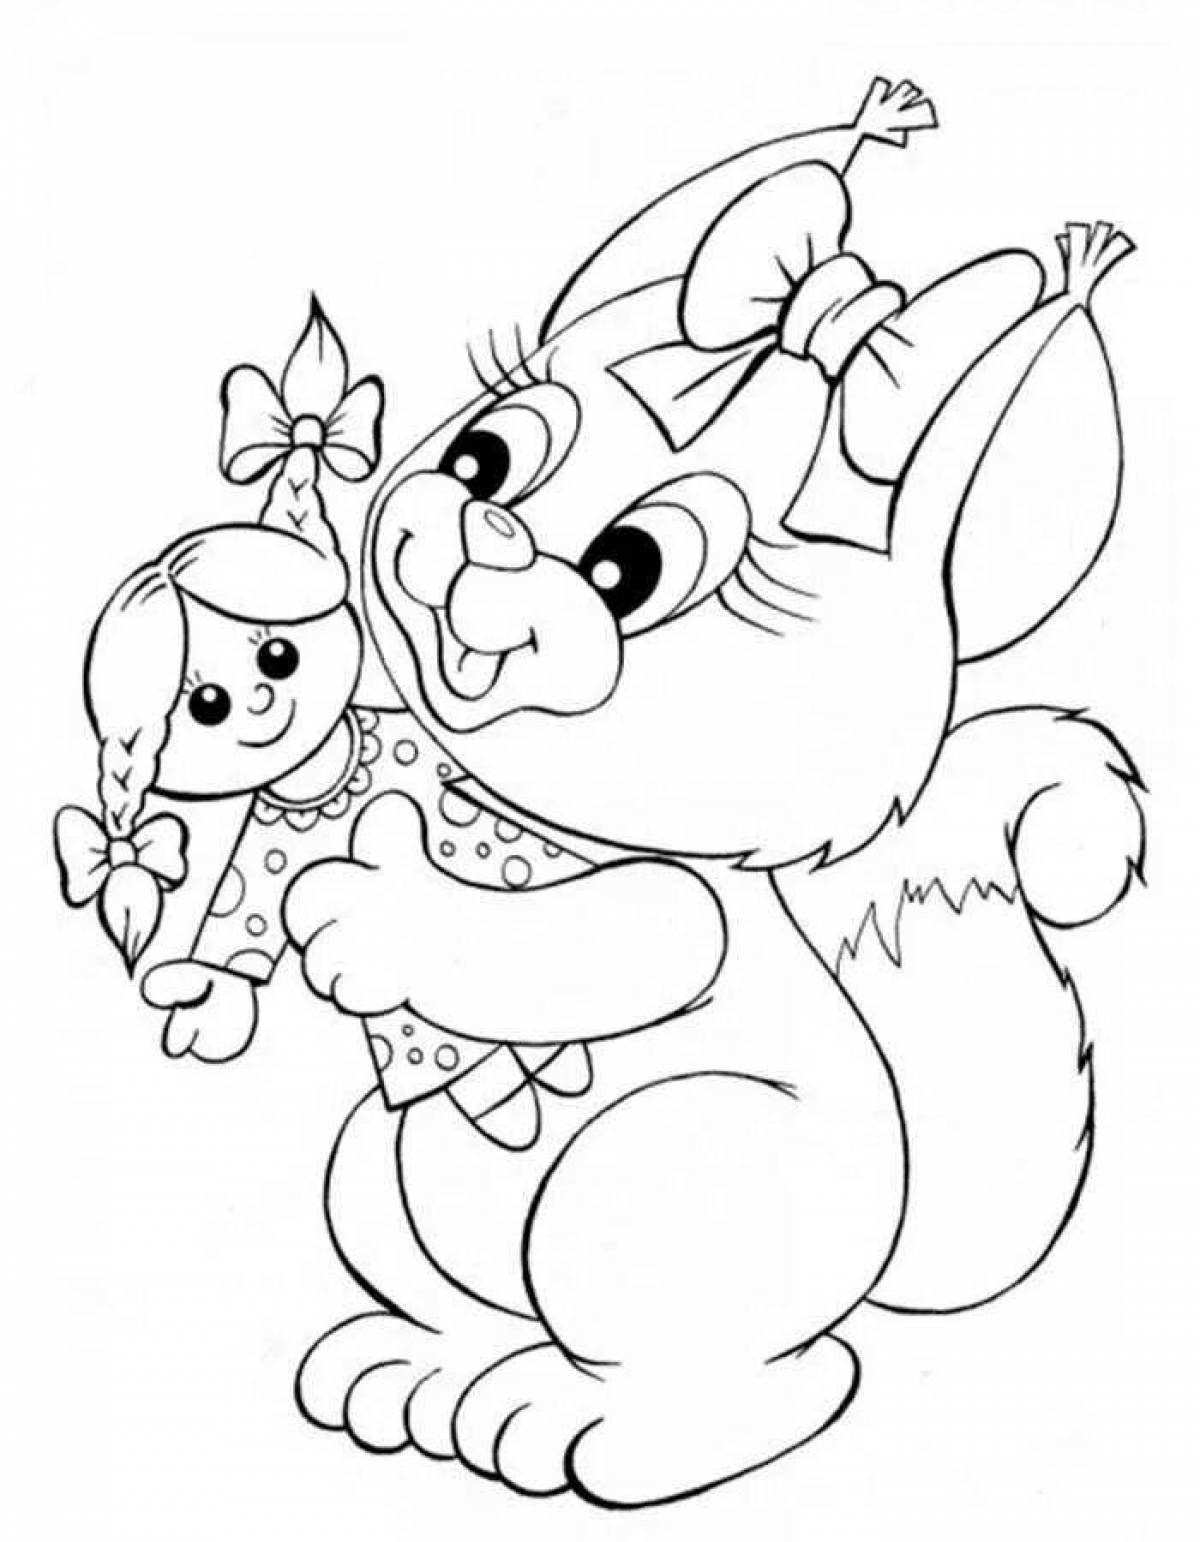 Bright squirrel coloring picture for kids